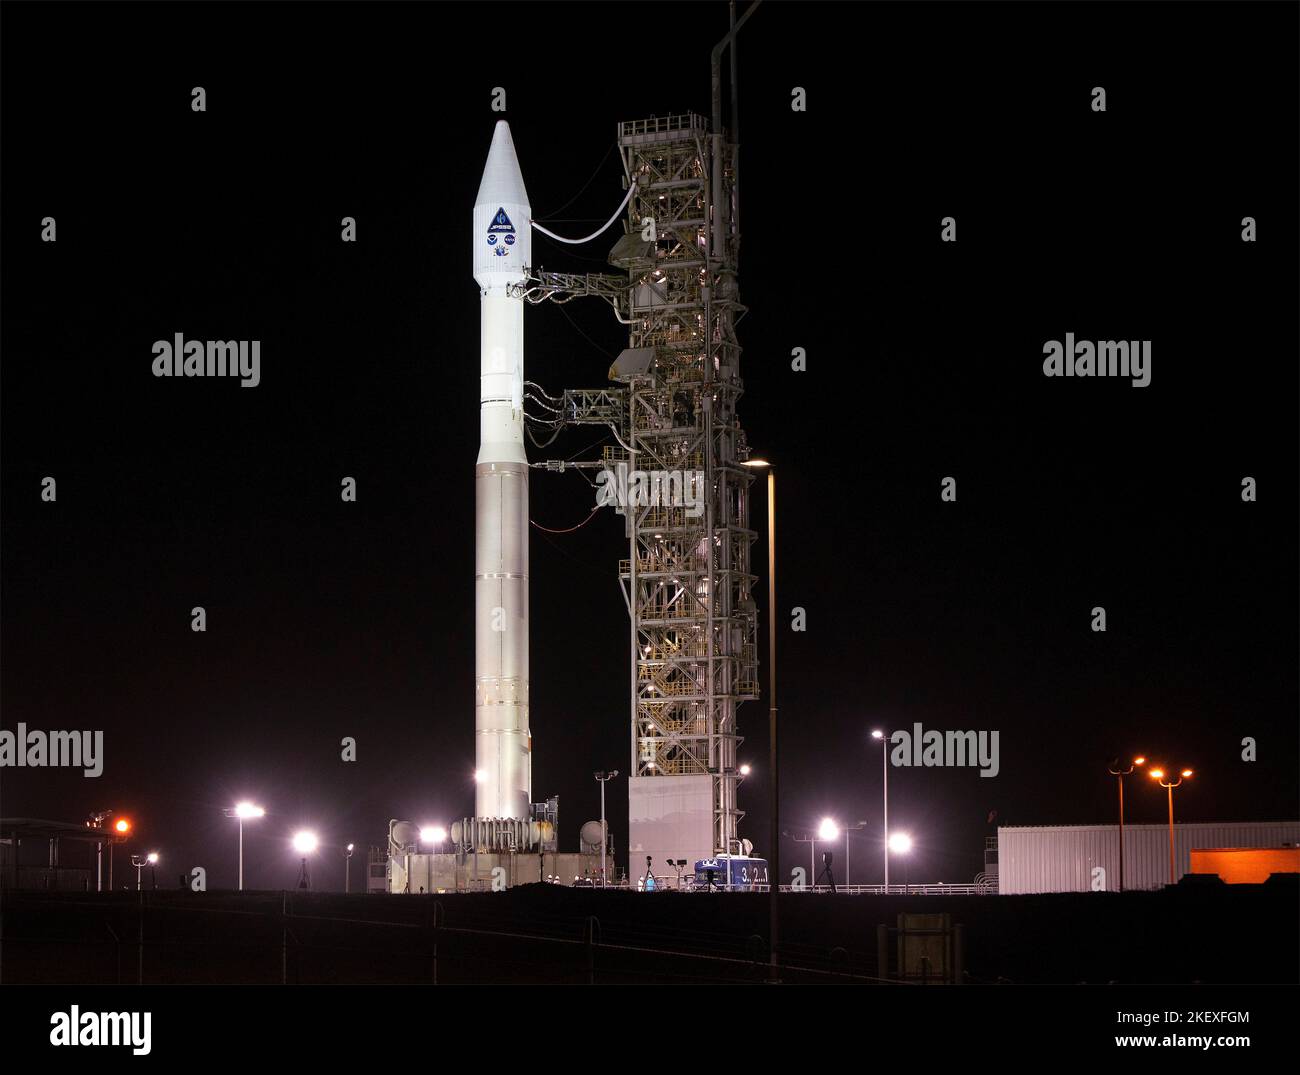 Lompoc, United States of America. 10 November, 2022. The National Oceanic and Atmospheric Administration Joint Polar Satellite System-2 satellite and the NASA Low-Earth Inflatable Decelerator Orbit Flight Test, stand ready to lift off atop a United Launch Alliance Atlas V rocket on Space Launch Complex-3 at Vandenberg Space Force Base, November 10, 2022 in Lompoc, California.  Credit: Liz Wilk/NASA/Alamy Live News Stock Photo